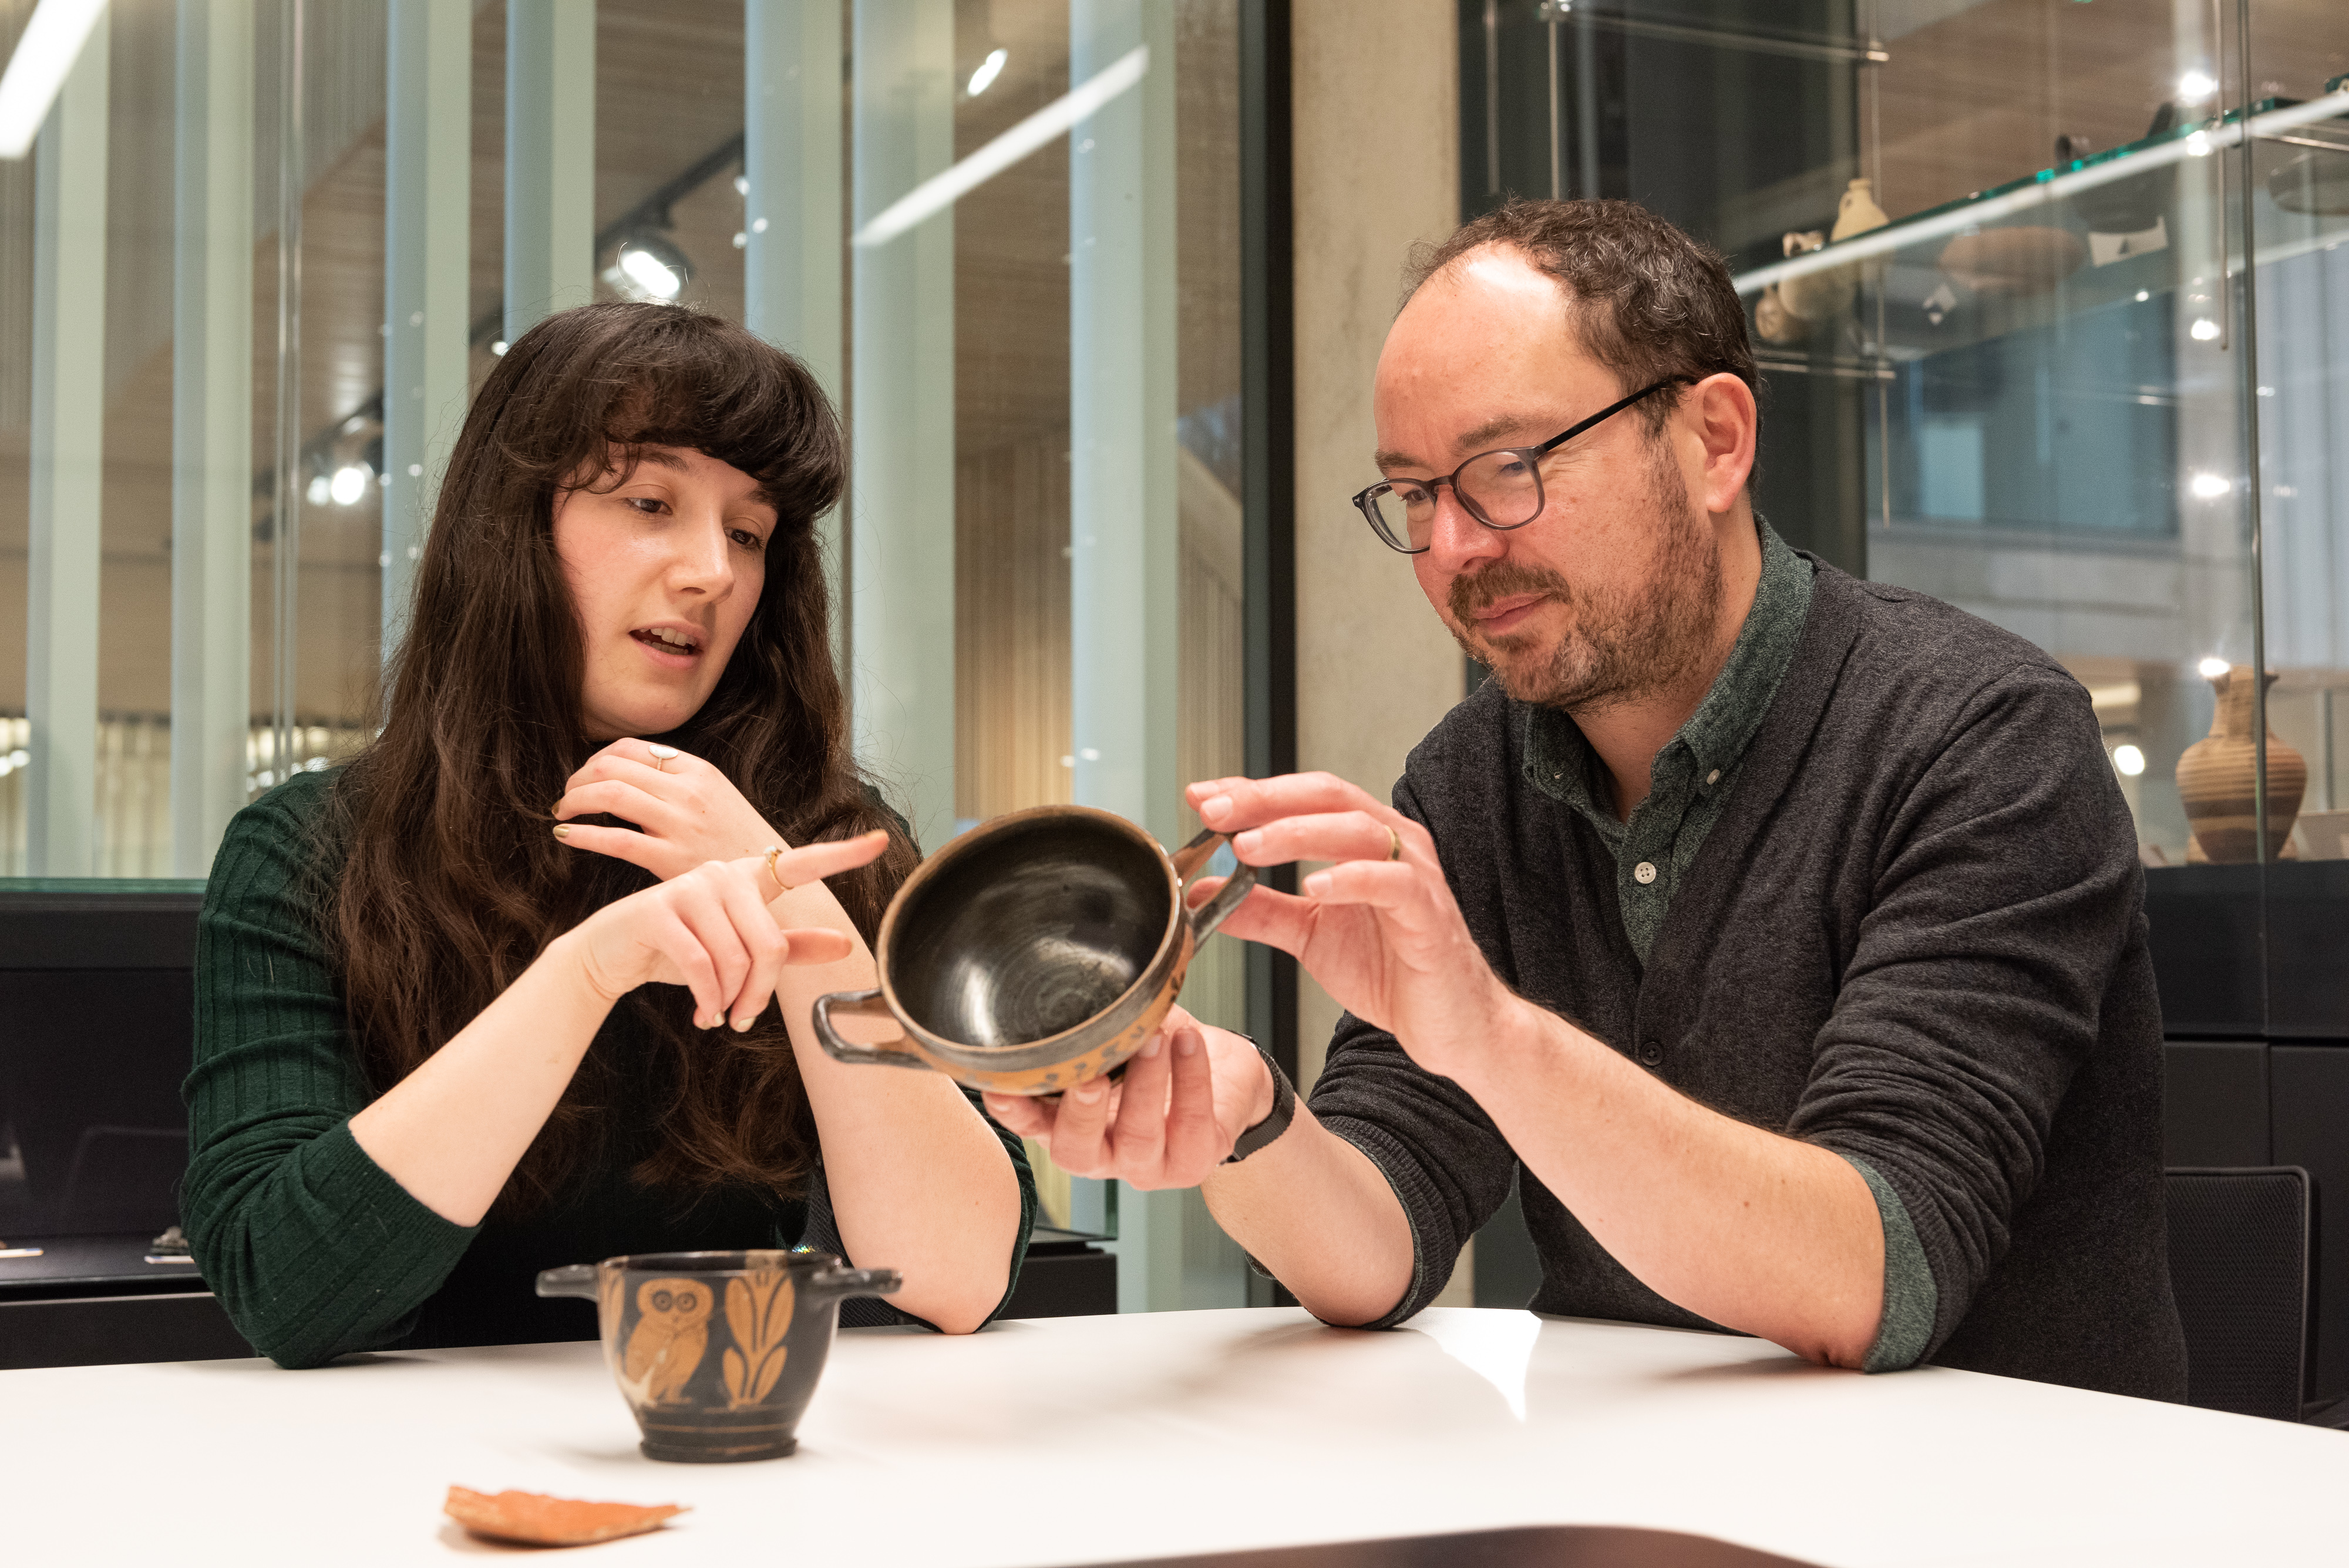 Staff Member holding a classical pottery artefact and discussing with university student